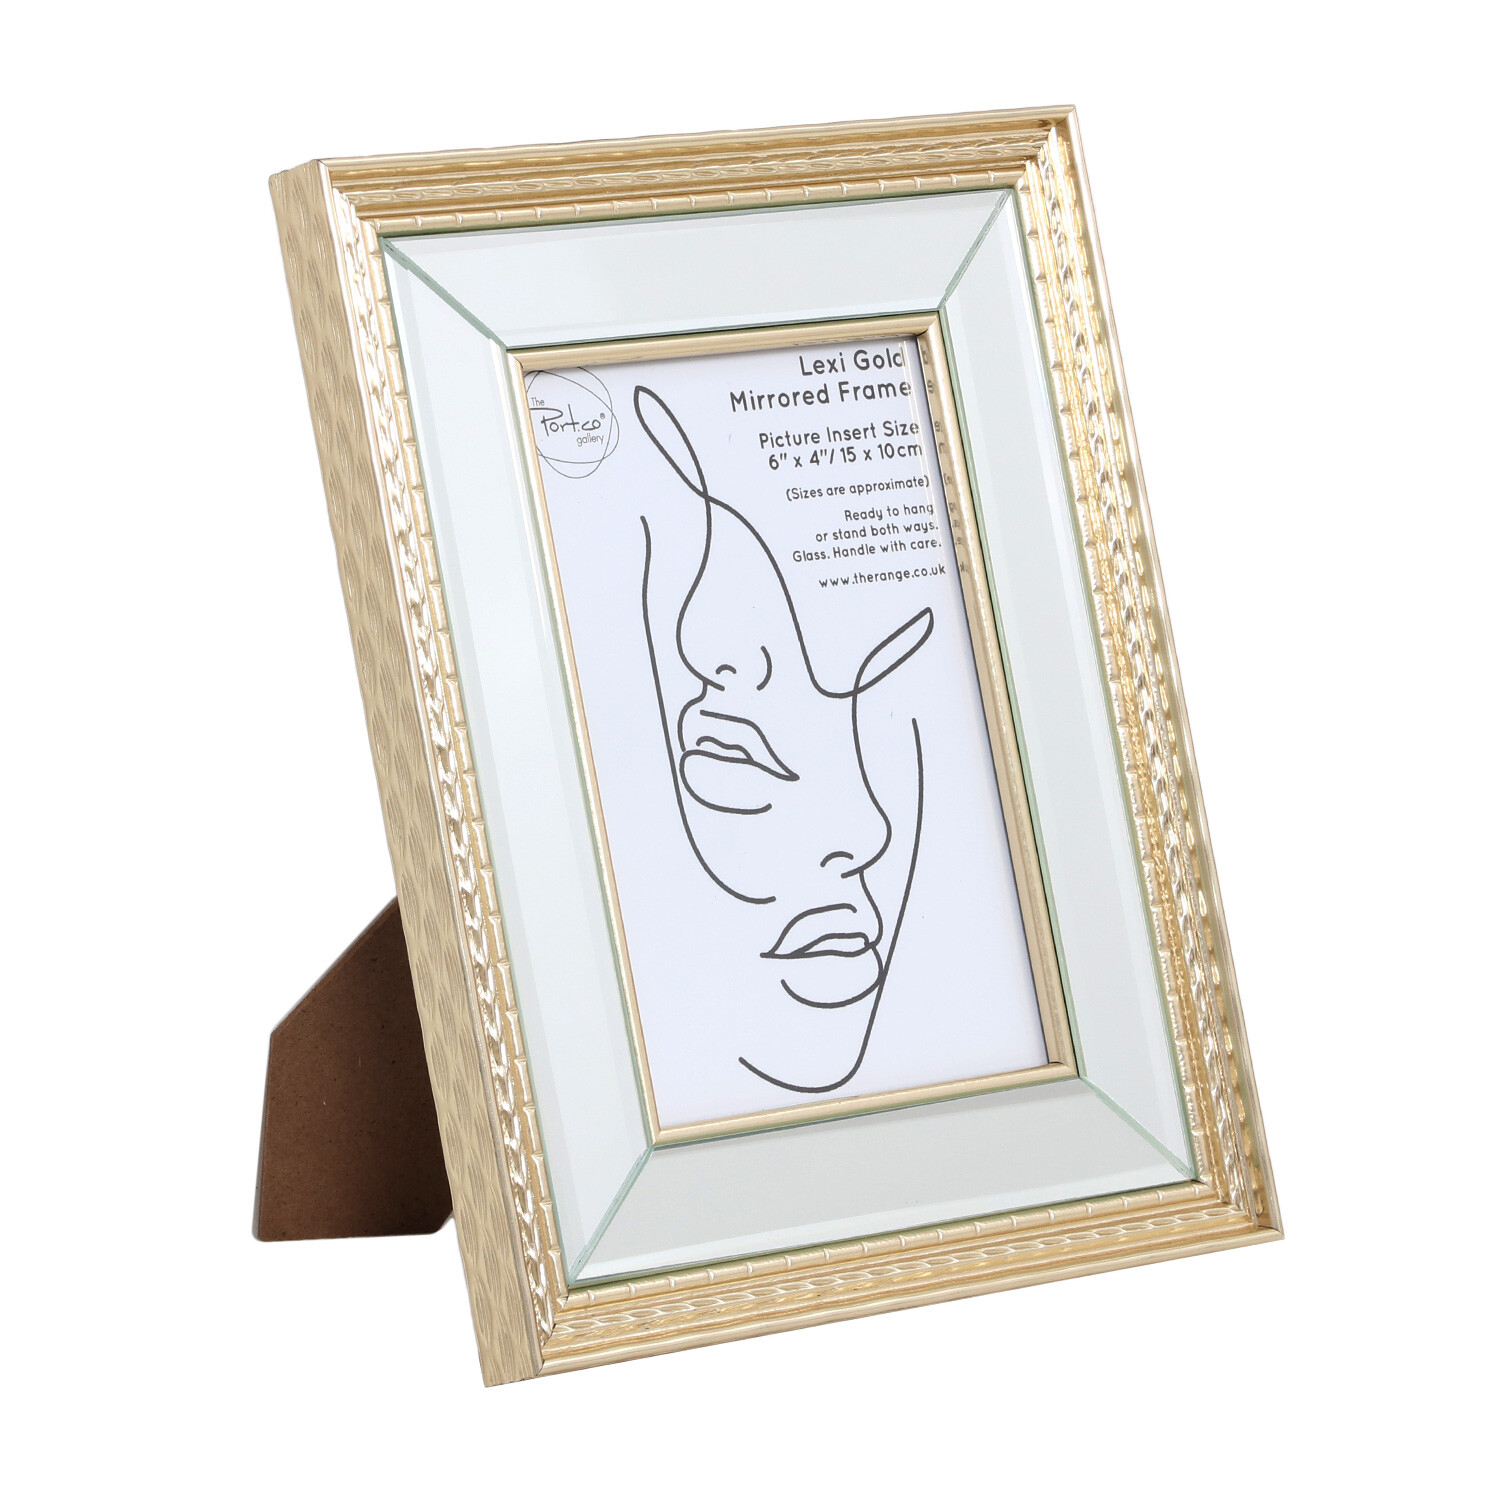 The Port. Co Gallery Lexi Gold Mirrored Photo Frame 6 x 4 inch Image 6